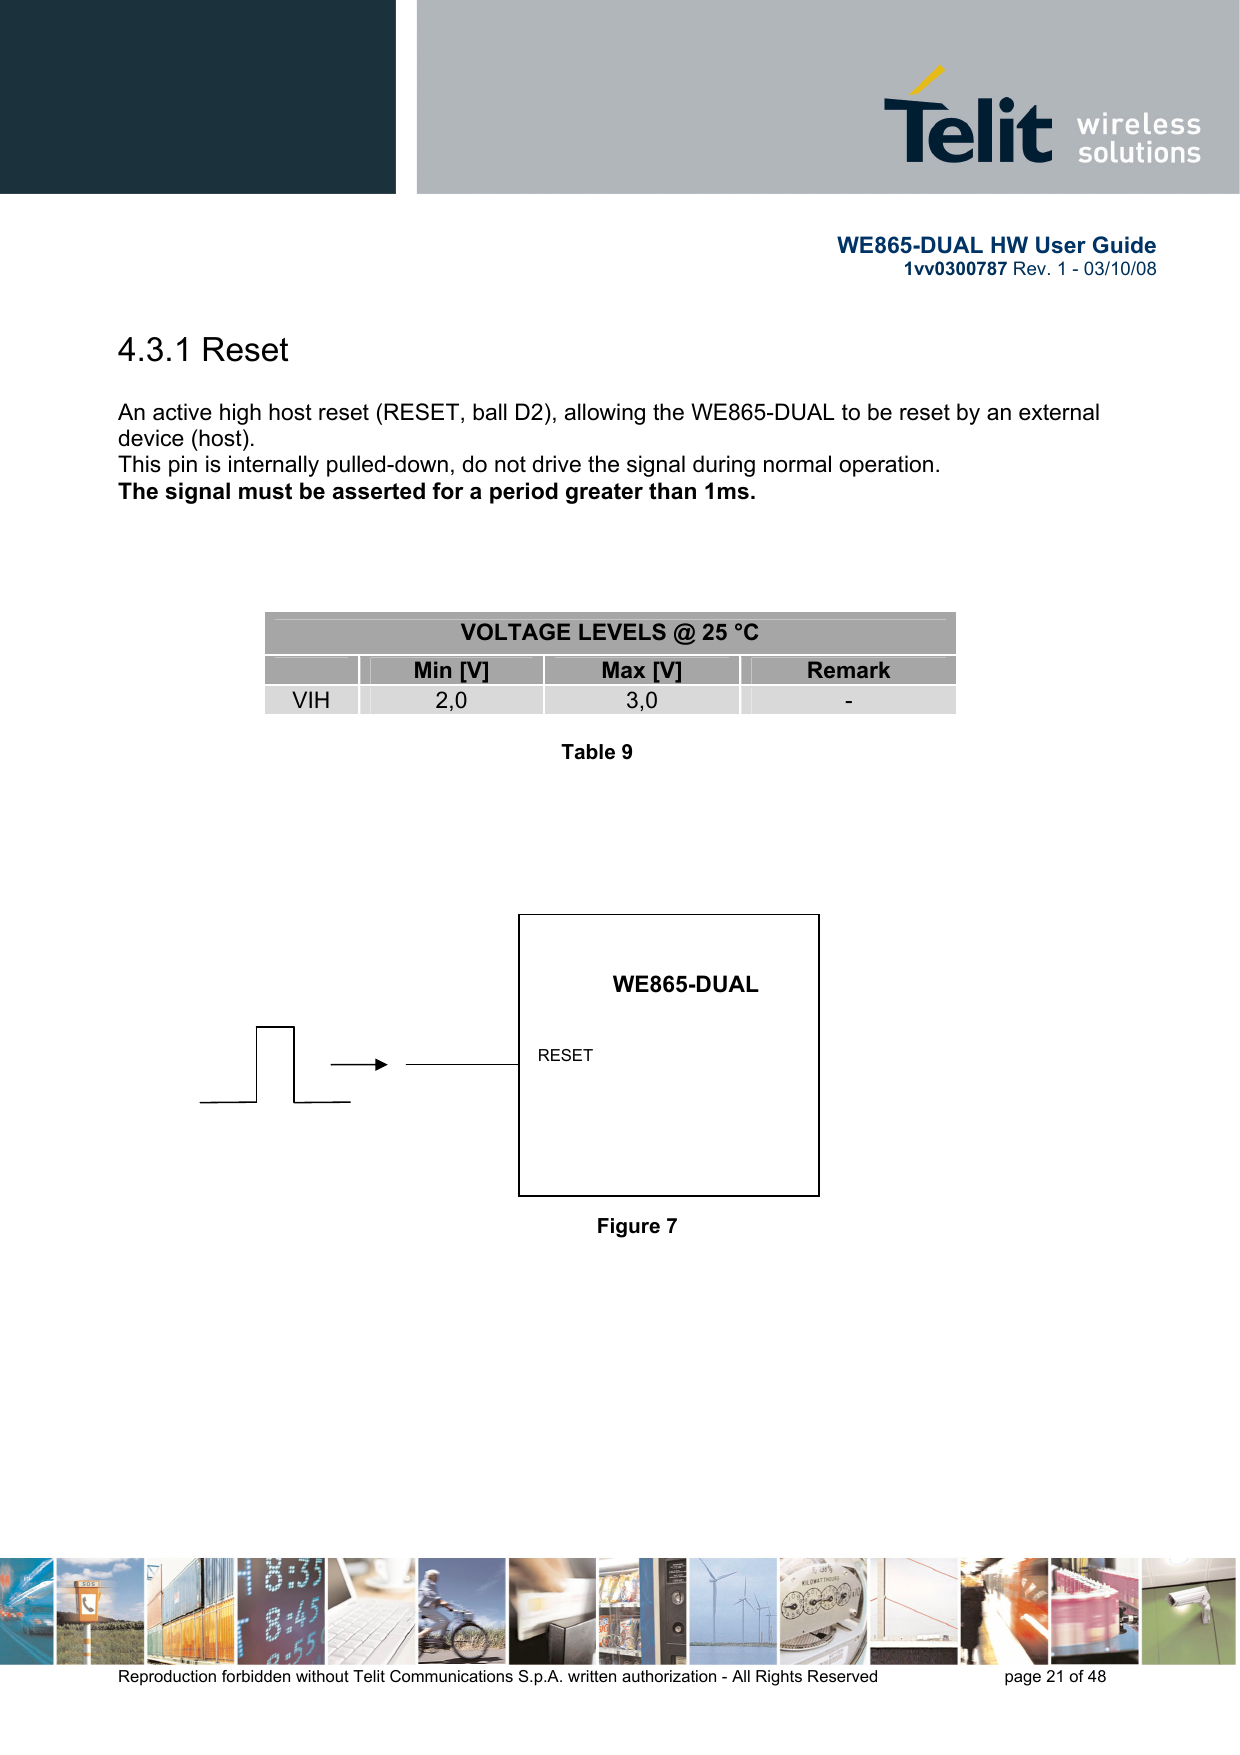       WE865-DUAL HW User Guide 1vv0300787 Rev. 1 - 03/10/08      Reproduction forbidden without Telit Communications S.p.A. written authorization - All Rights Reserved    page 21 of 48  4.3.1 Reset  An active high host reset (RESET, ball D2), allowing the WE865-DUAL to be reset by an external device (host).  This pin is internally pulled-down, do not drive the signal during normal operation.  The signal must be asserted for a period greater than 1ms.     VOLTAGE LEVELS @ 25 °C  Min [V]  Max [V]  Remark VIH  2,0  3,0  -  Table 9               Figure 7            WE865-DUAL RESET 